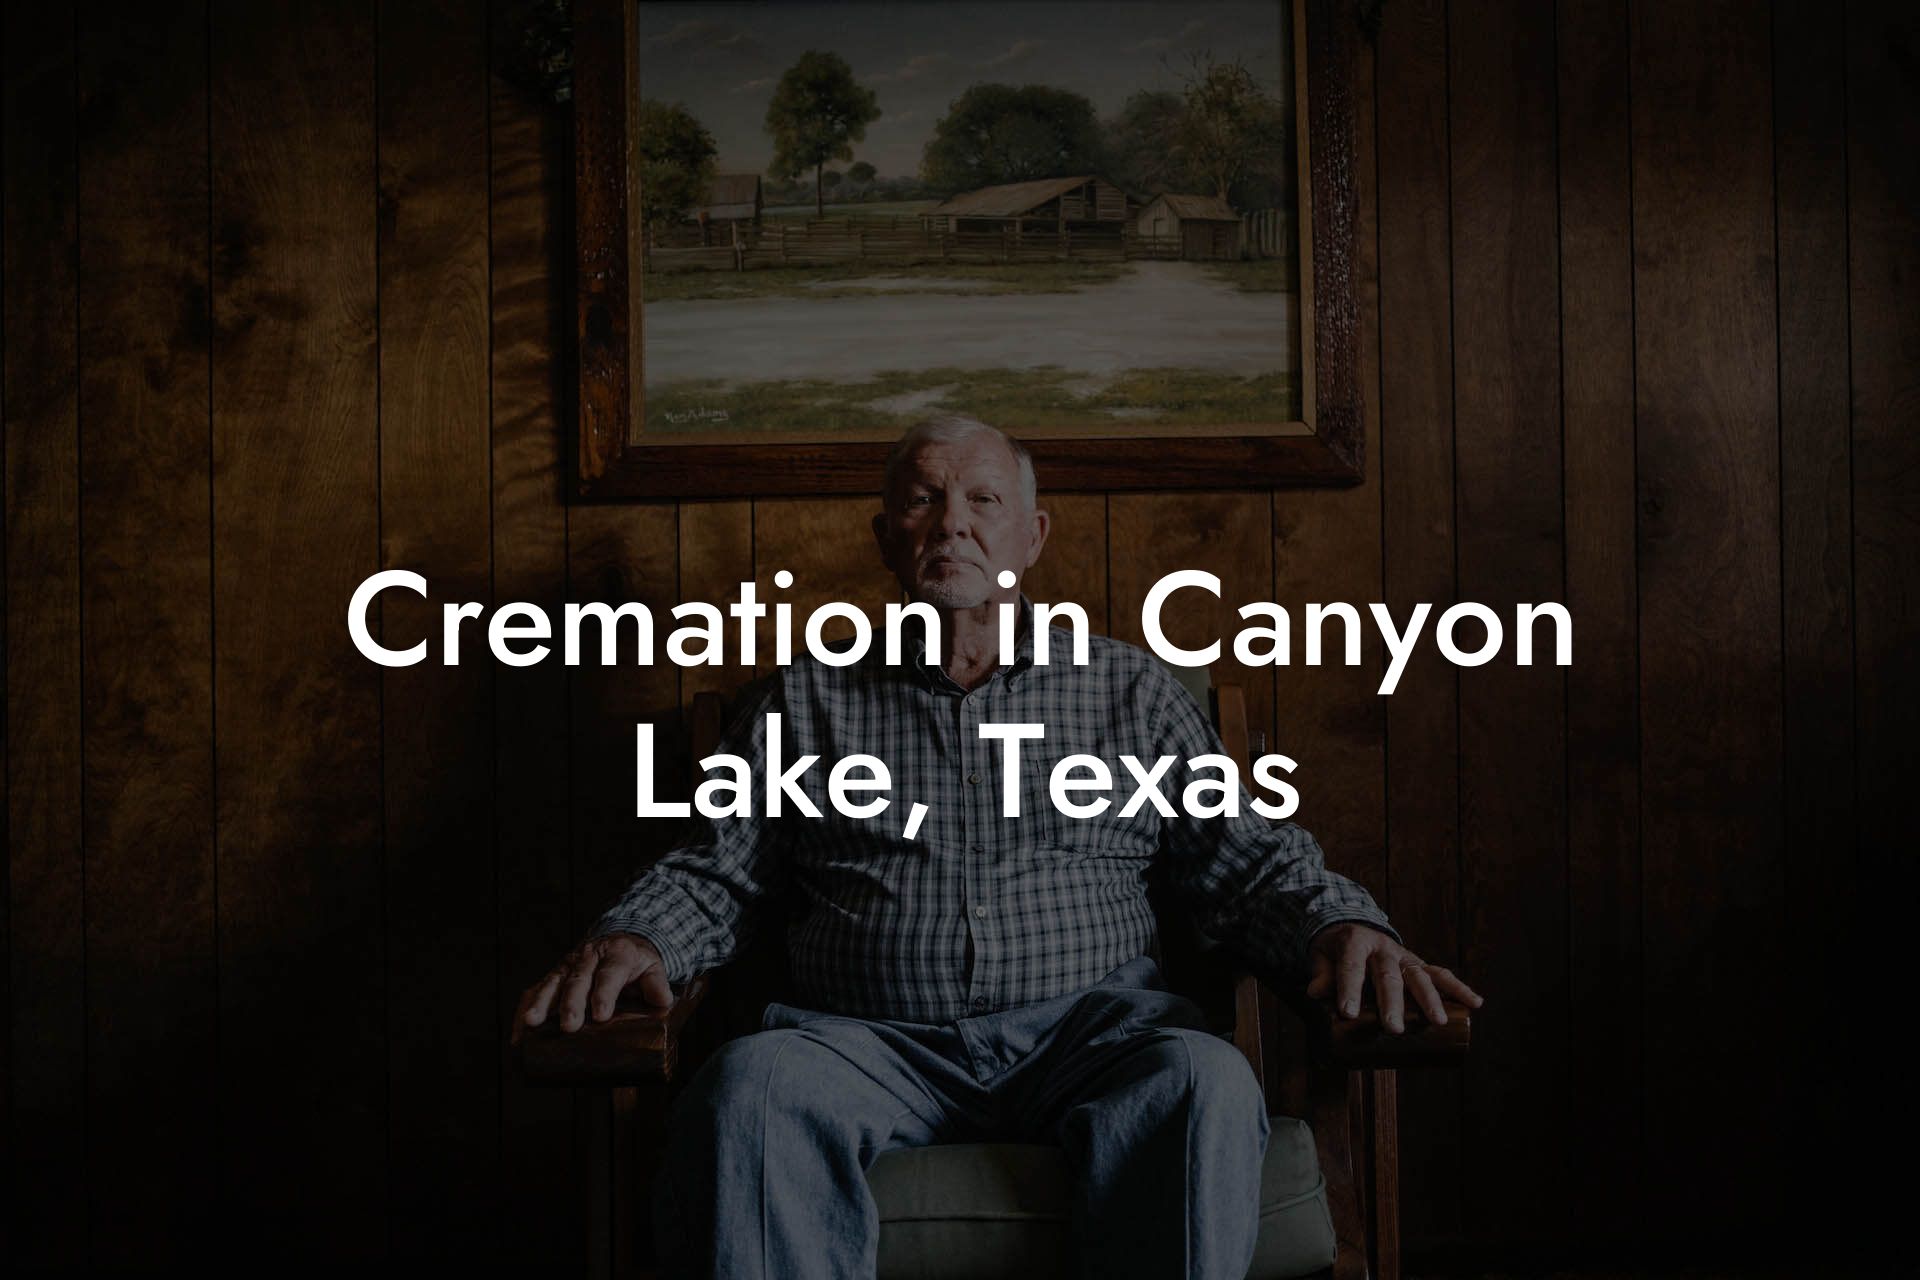 Cremation in Canyon Lake, Texas